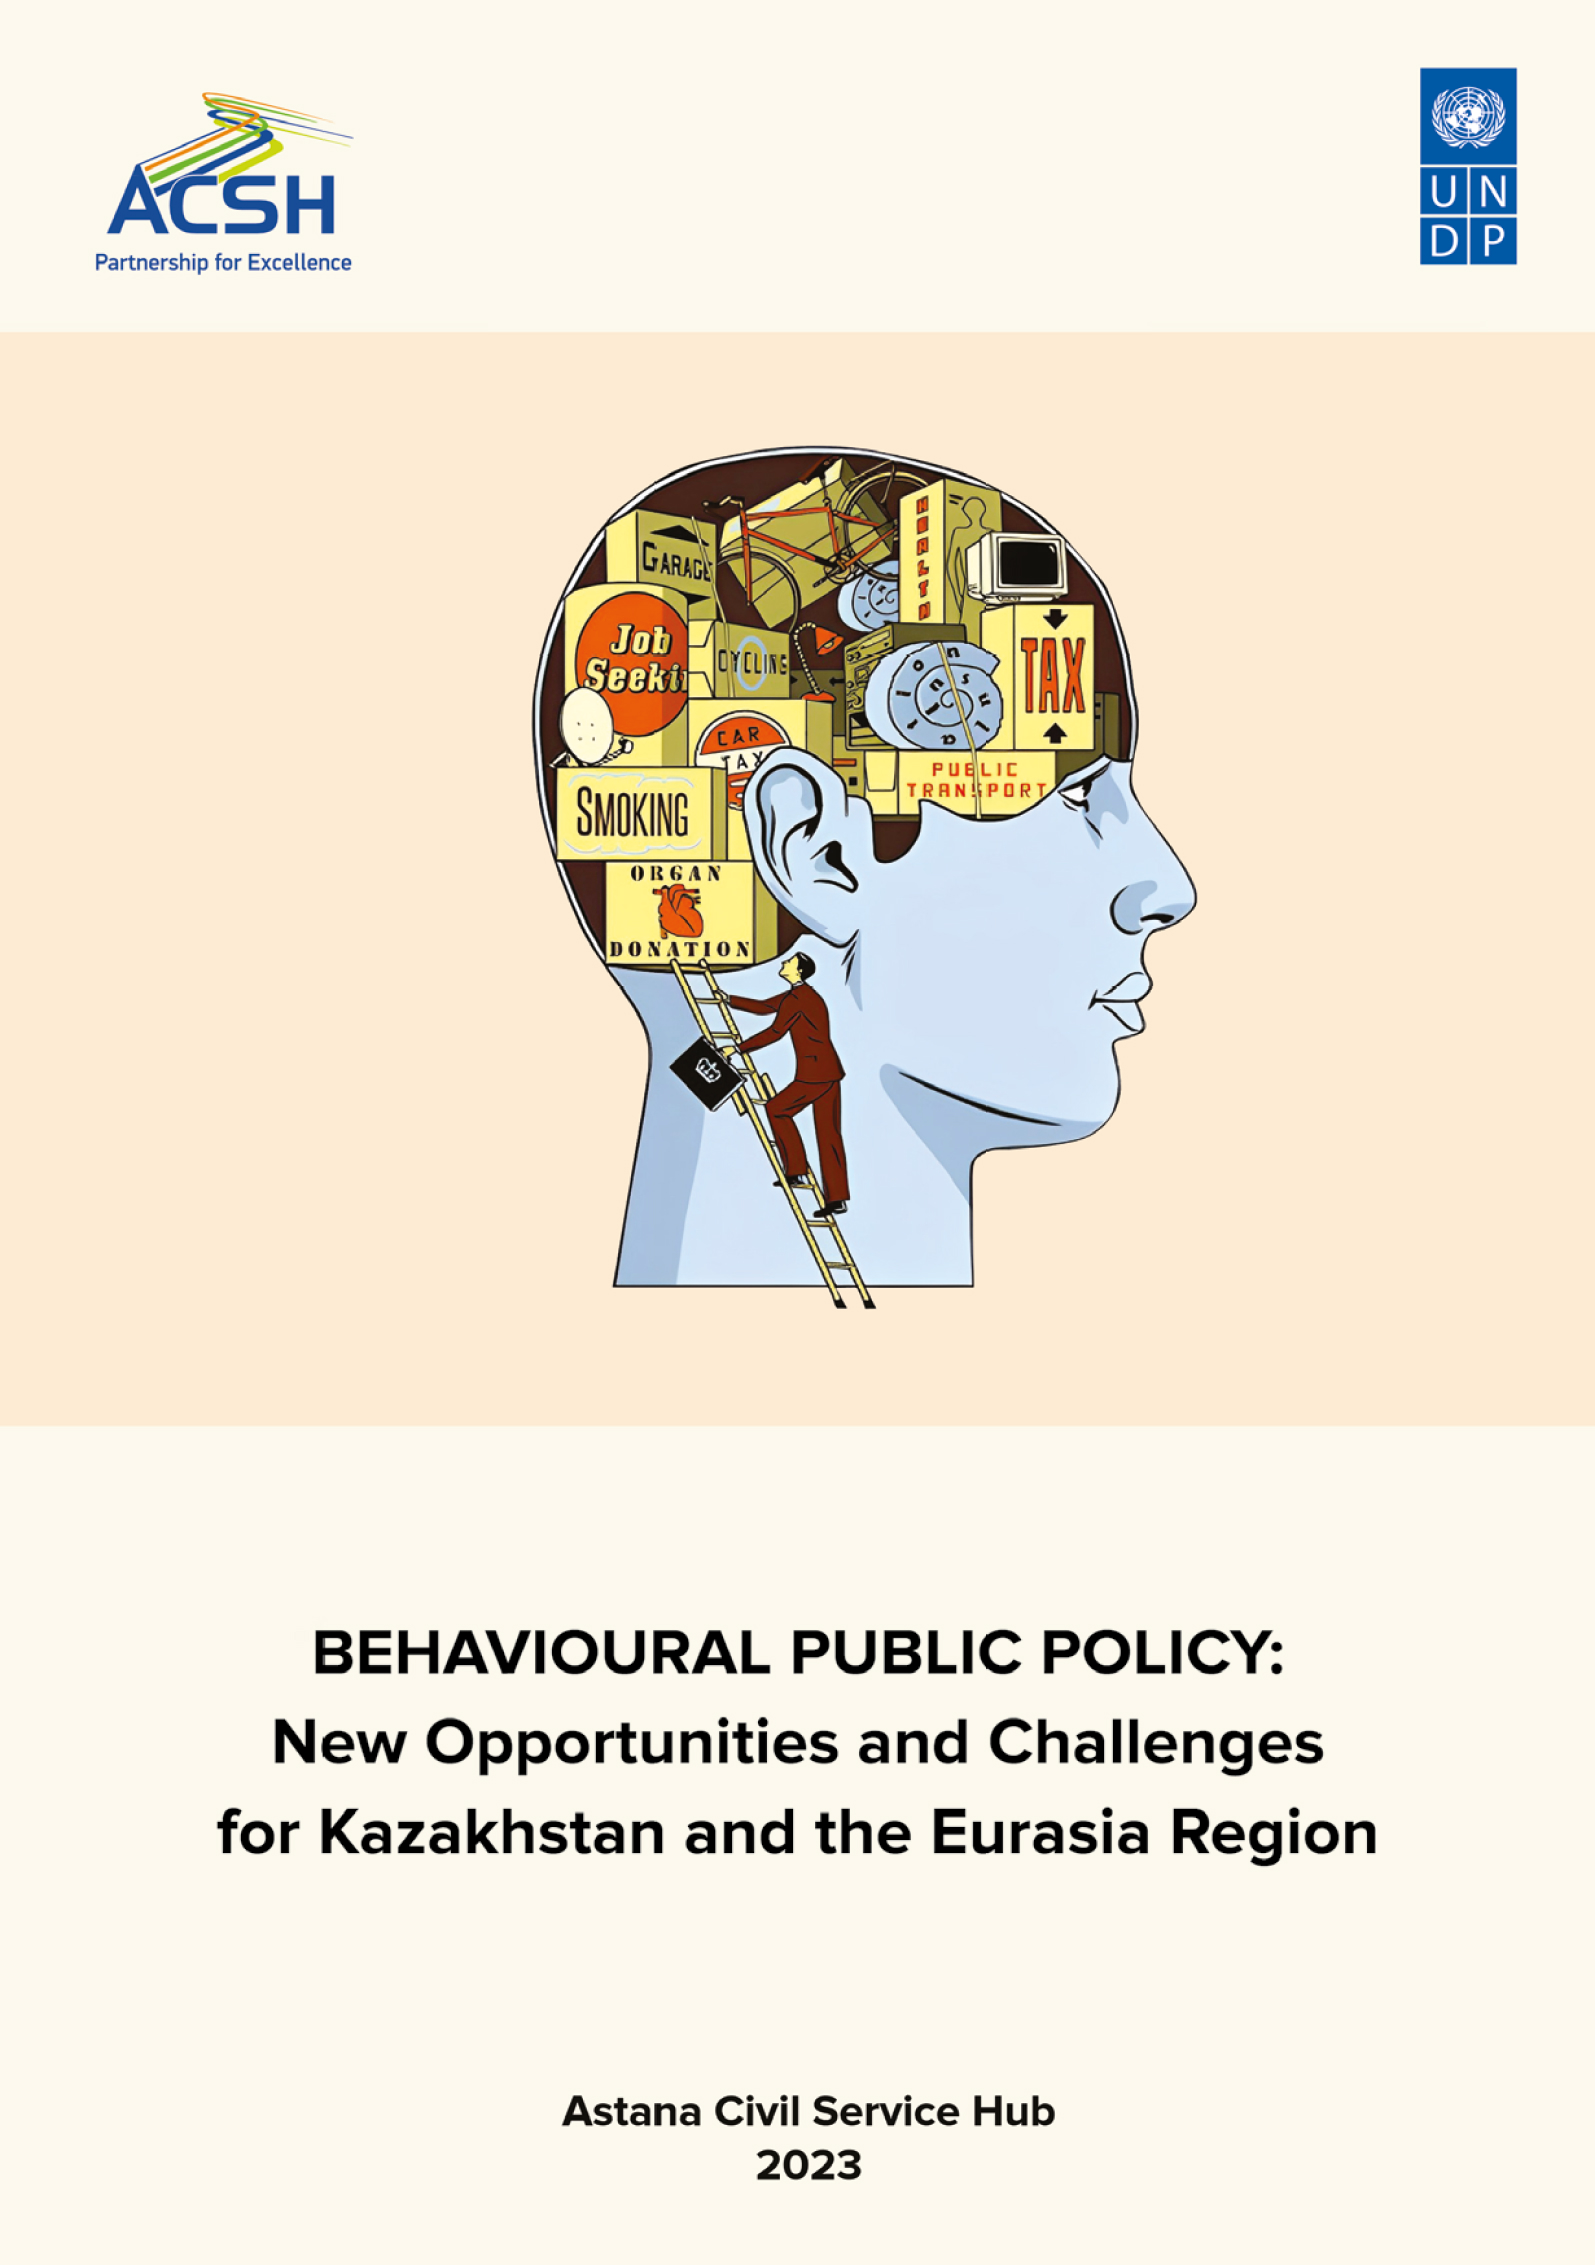 Behavioural Public Policy: New Opportunities and Challenges for Kazakhstan and the Eurasia Region